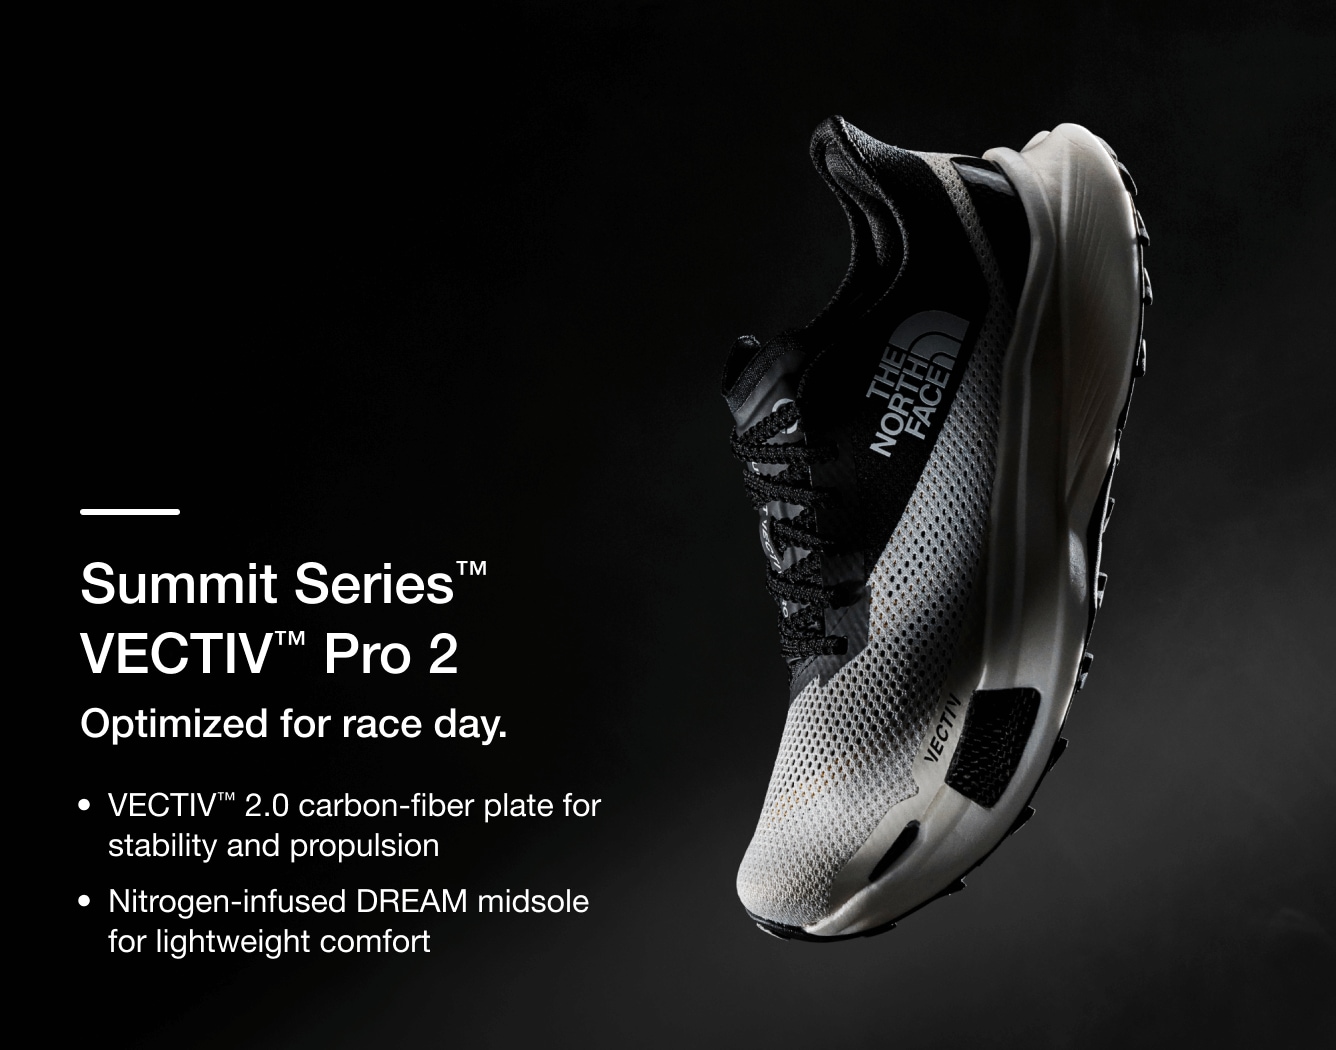 Studio shot of the VECTIV Pro trail running shoe from The North Face with text overlay detailing features.